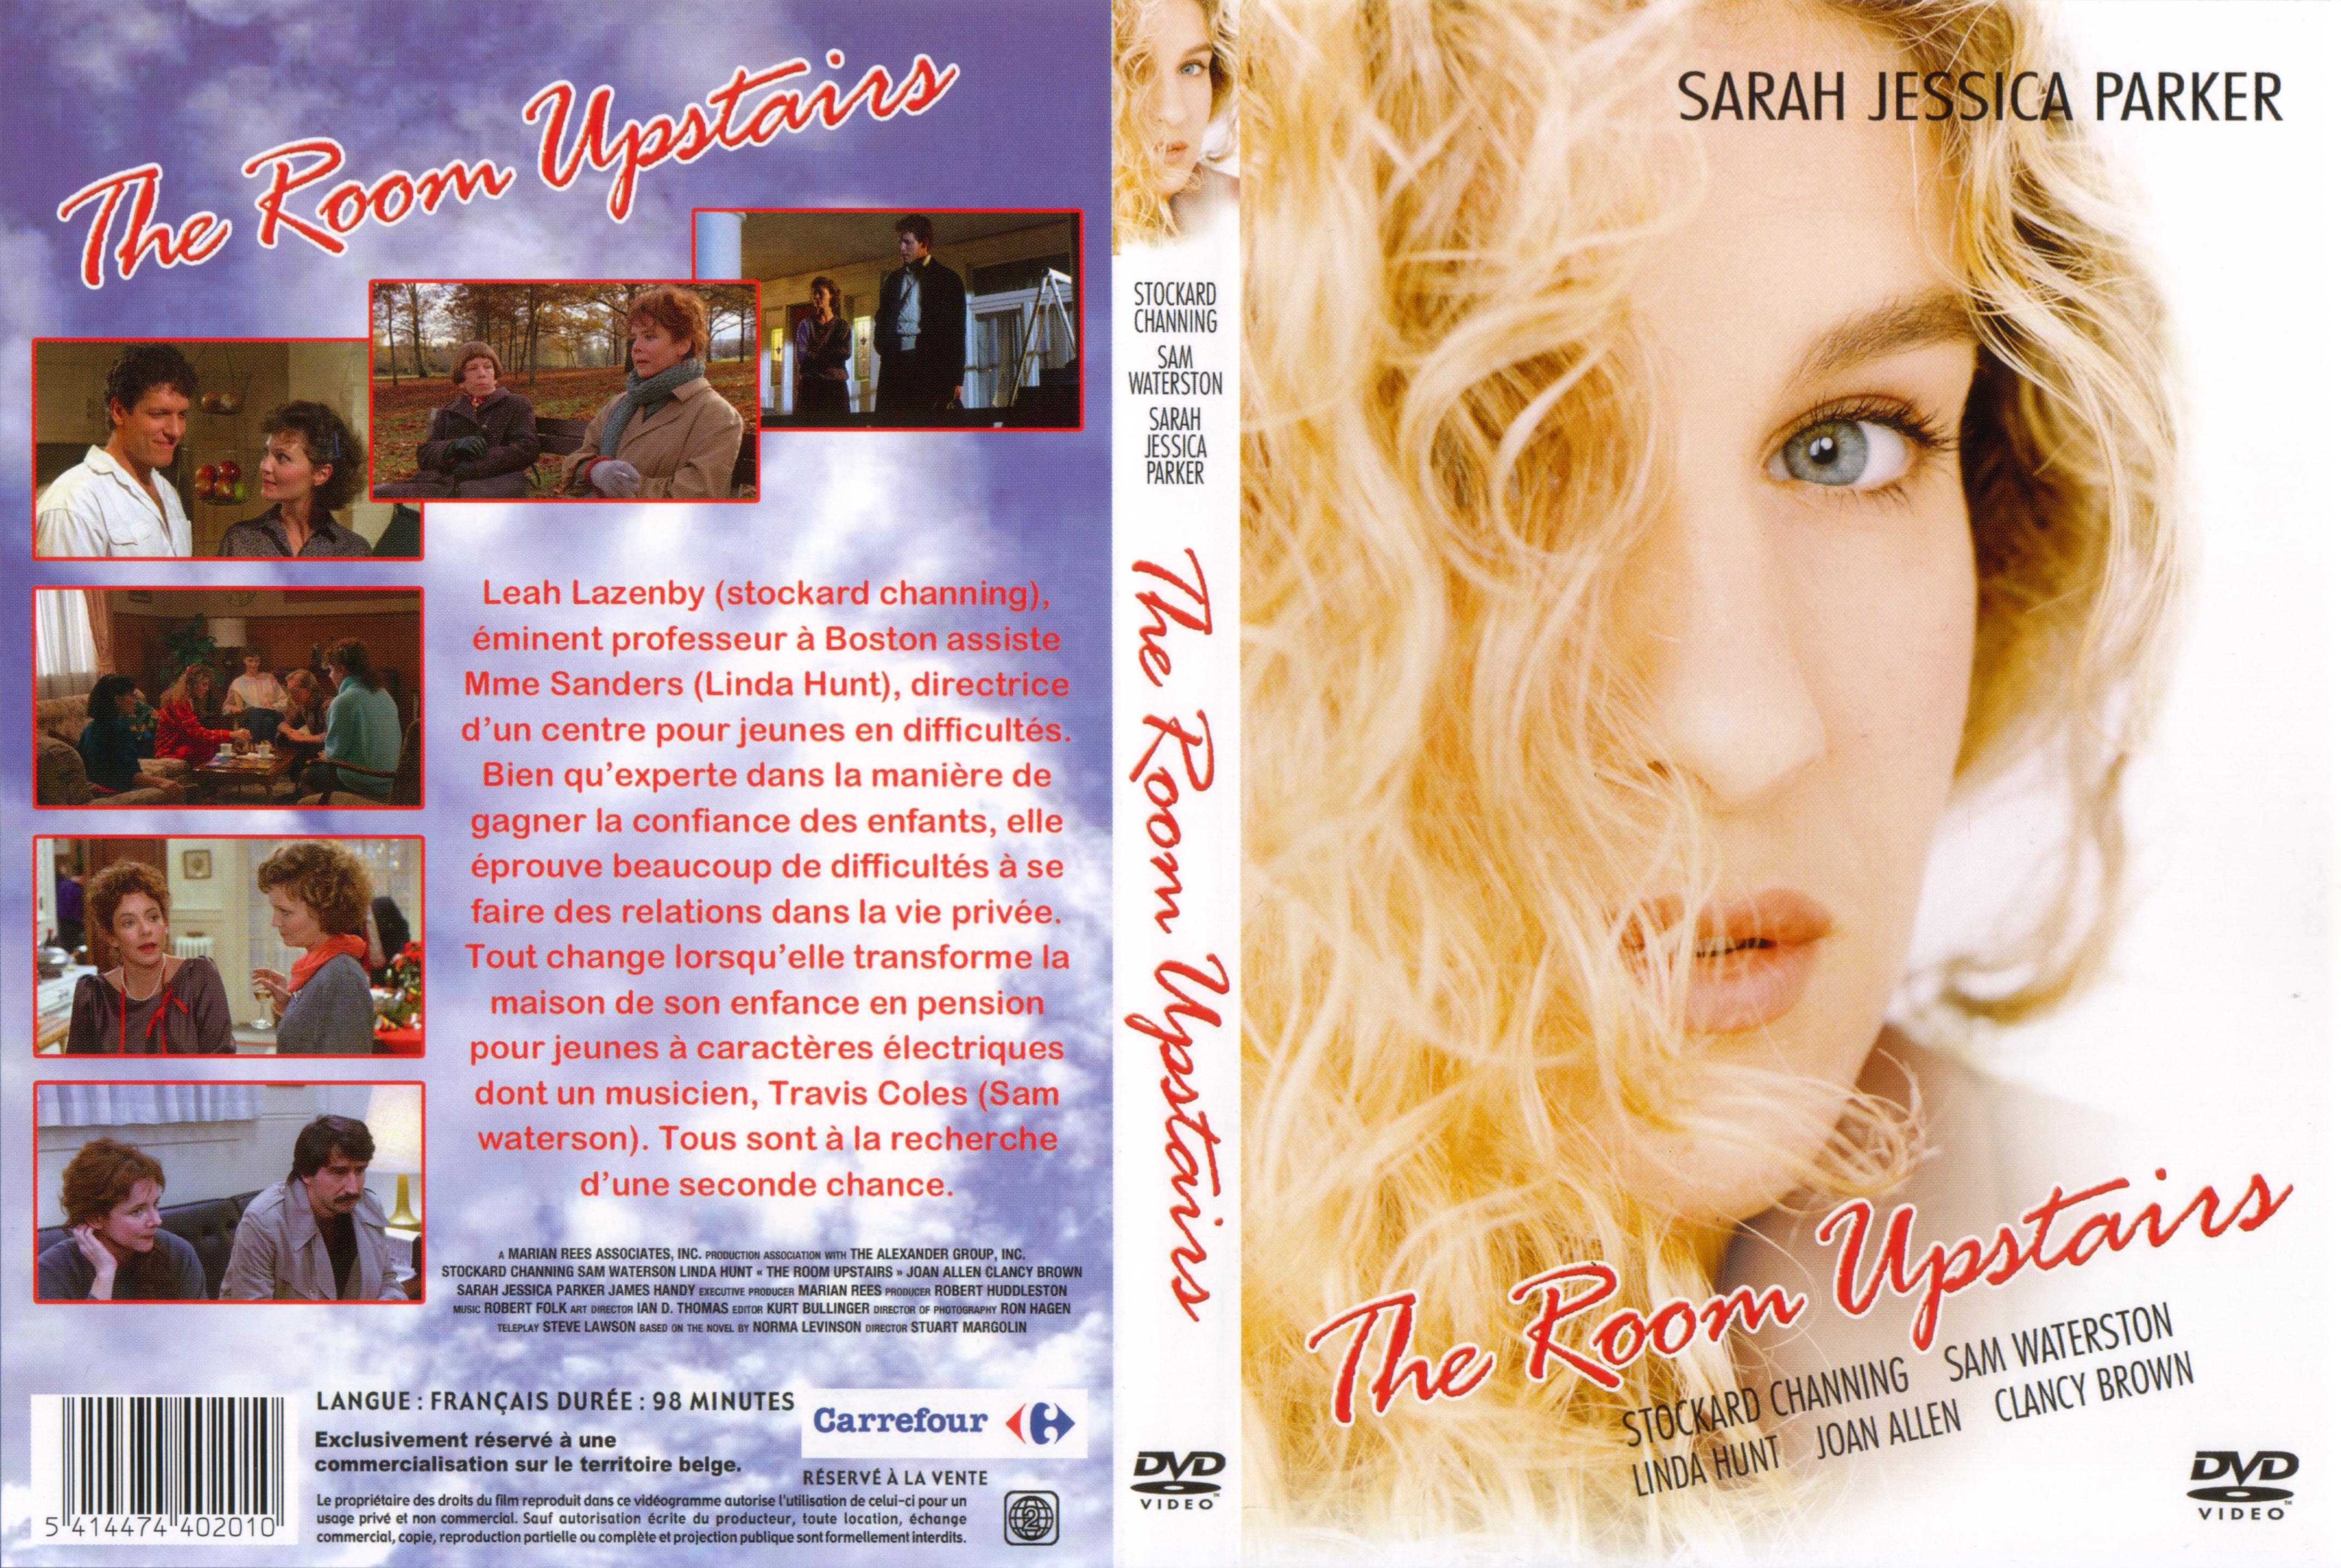 Jaquette DVD The room upstairs